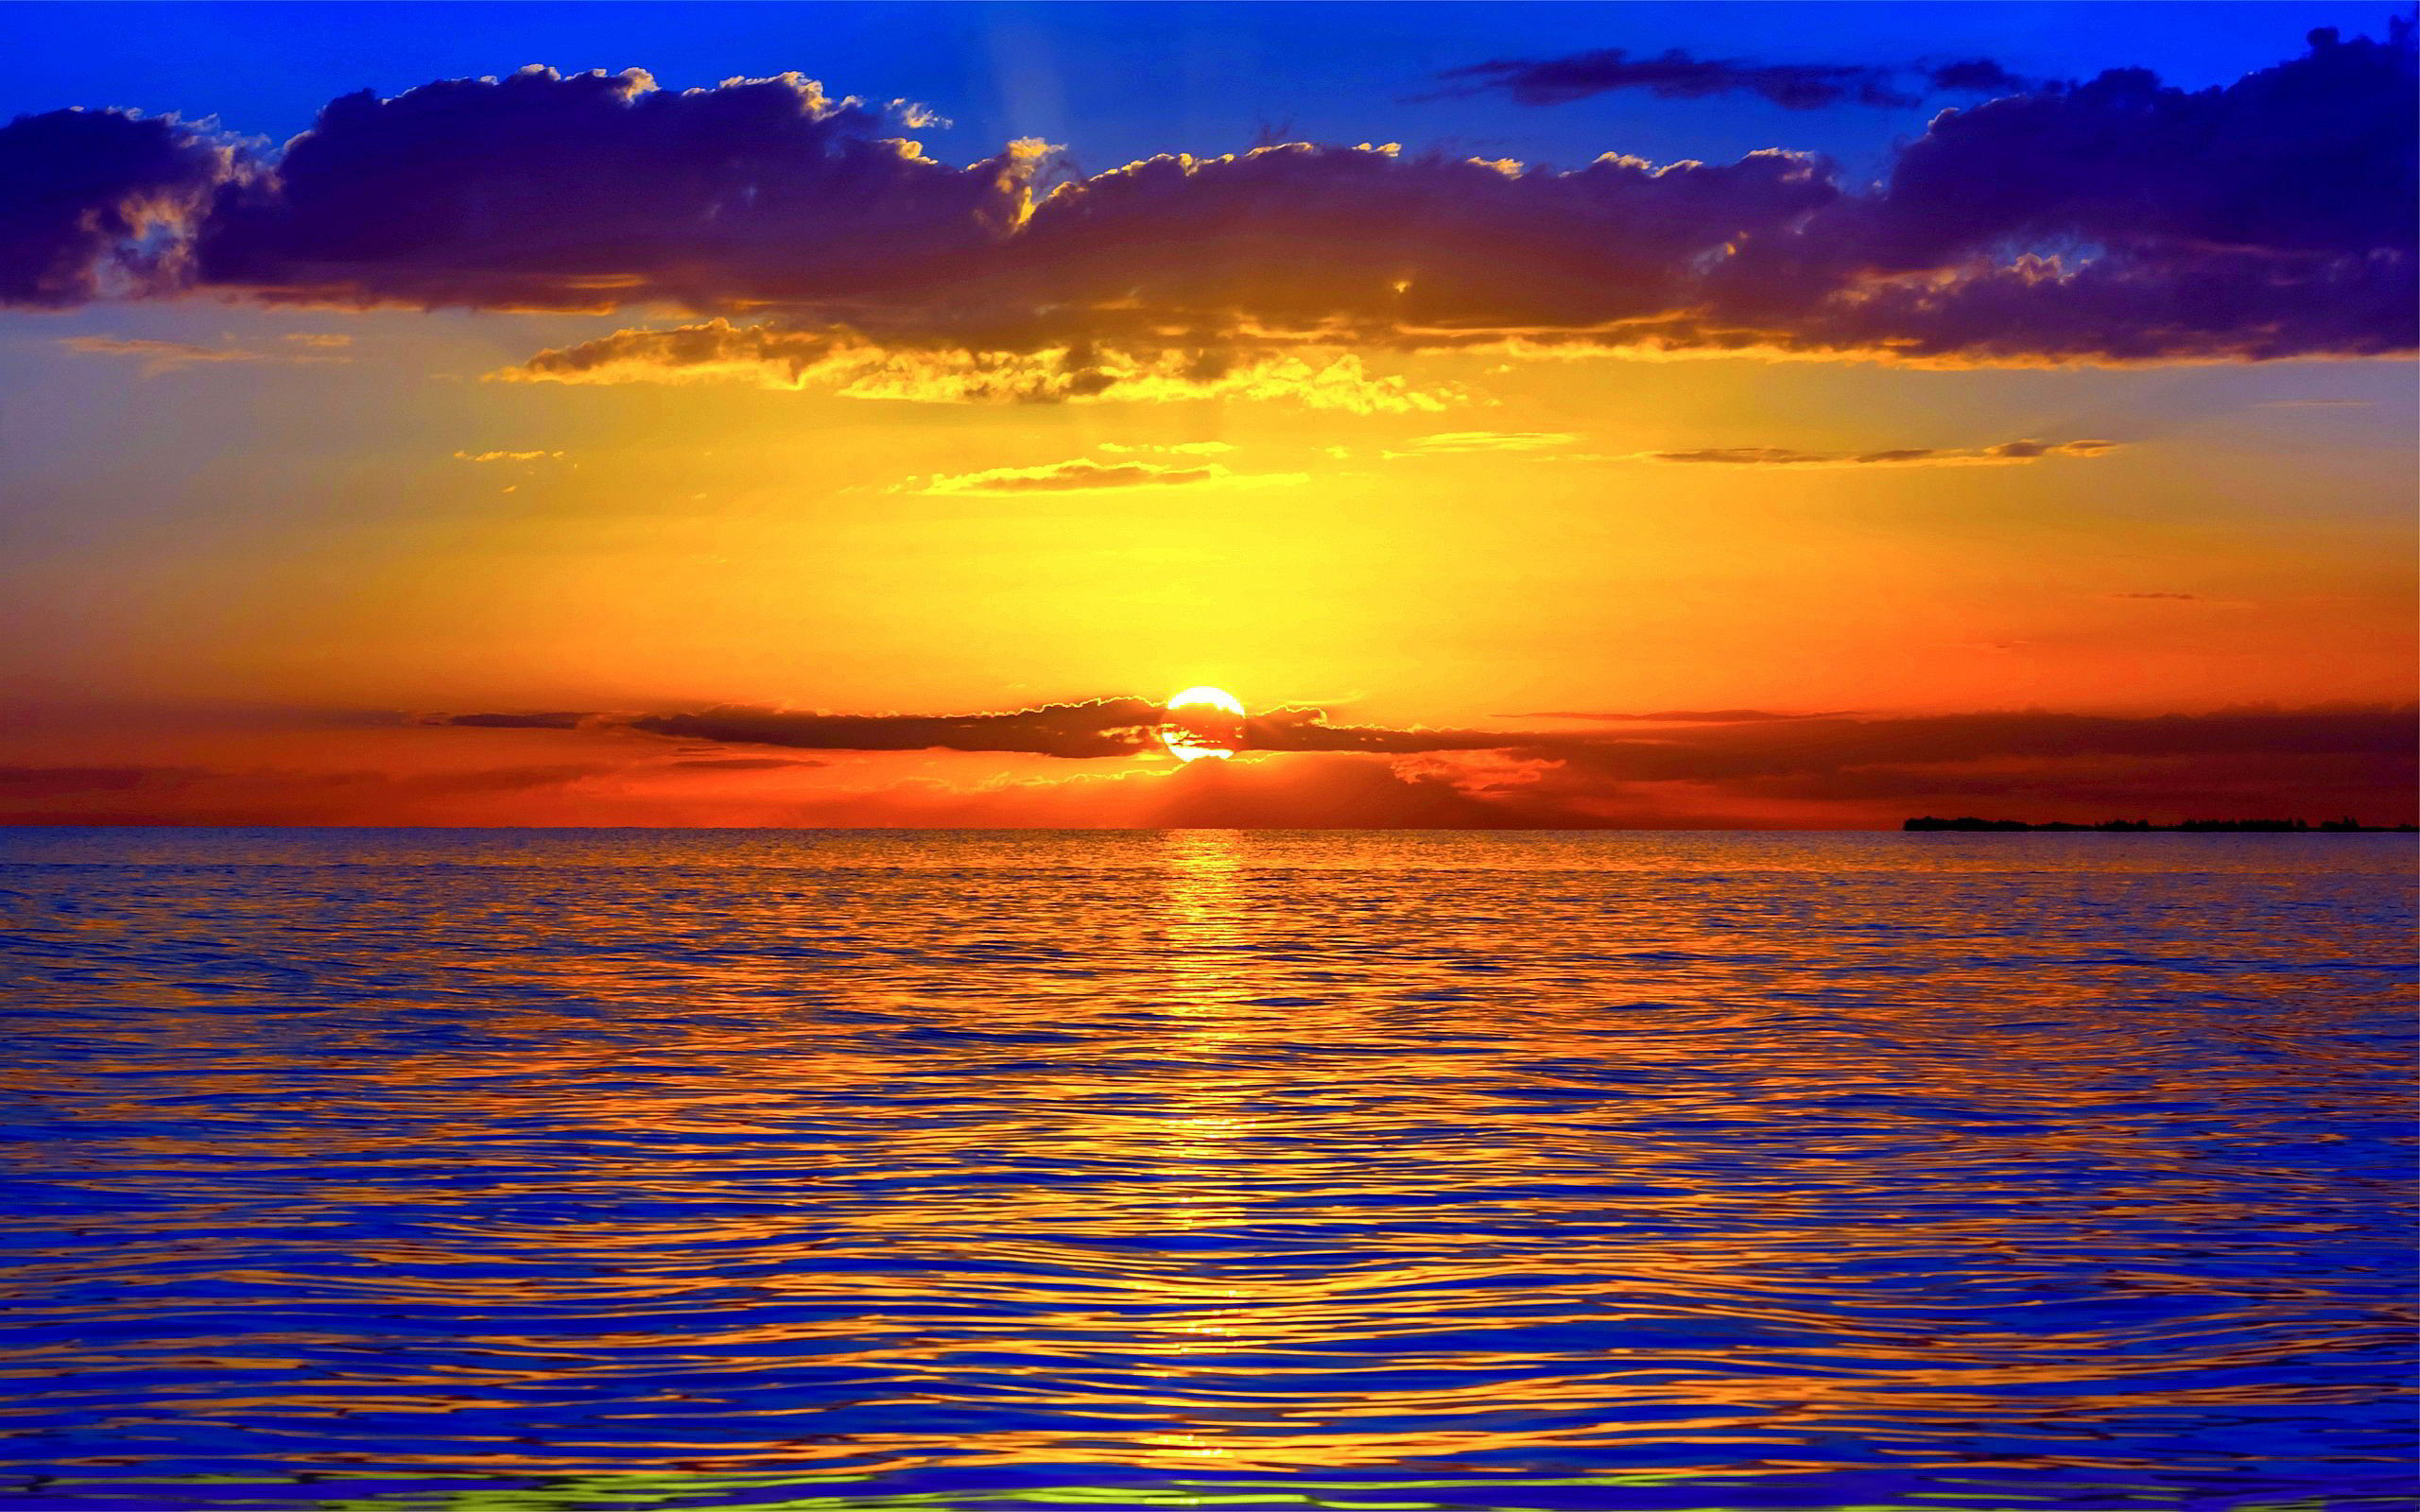 2560x1600 Only the best free ocean sunsets wallpapers you can find online! Ocean  sunsets wallpapers and background images for desktop, iPhone, Android and  any screen ...